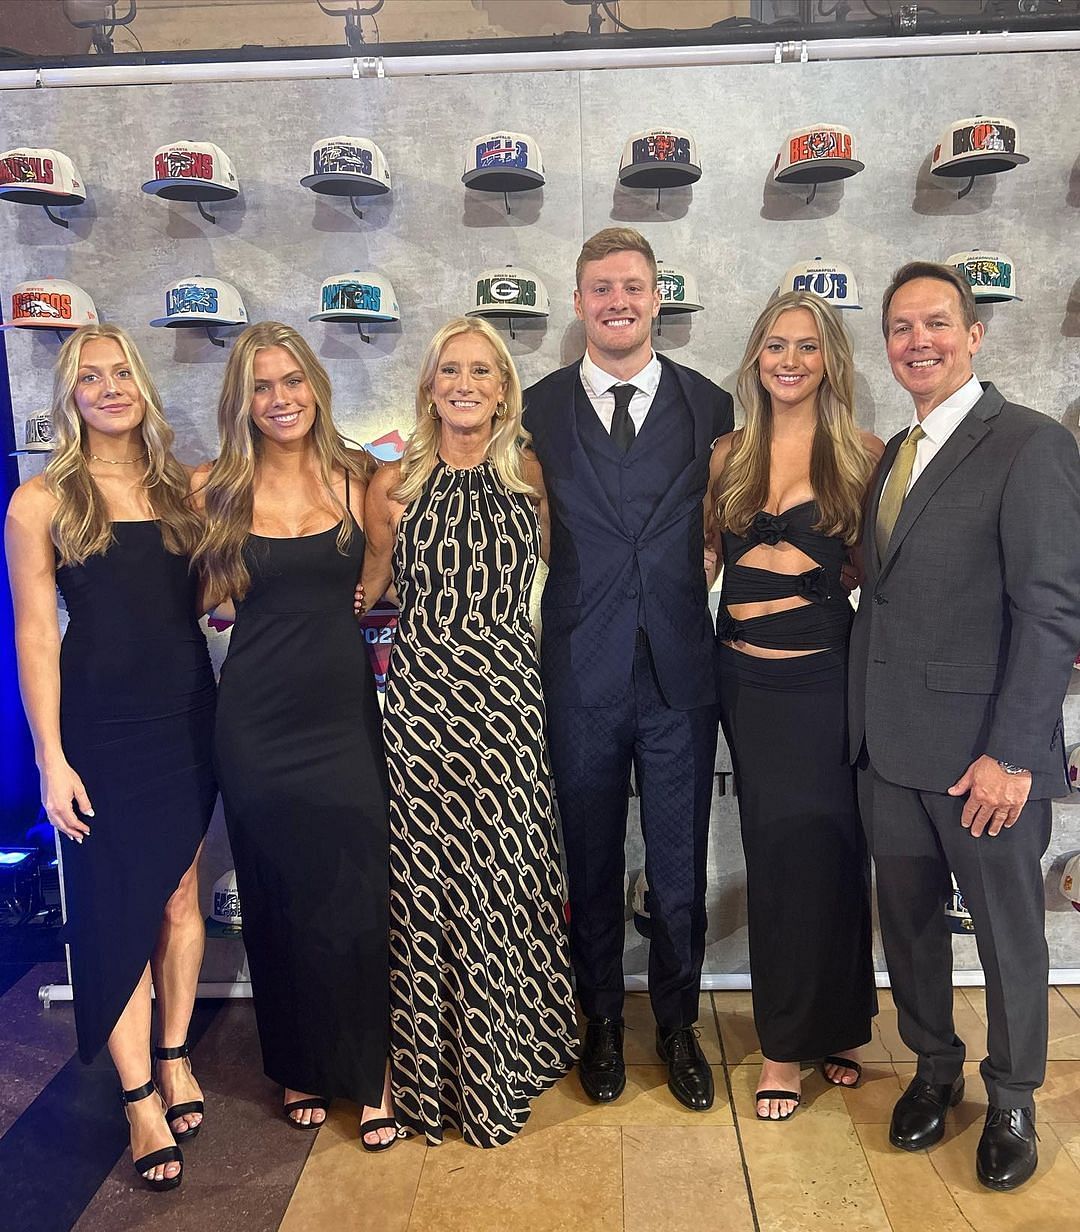 The Levis family at the 2023 NFL Draft (Image credit: Instagram.com/kelleylevis)